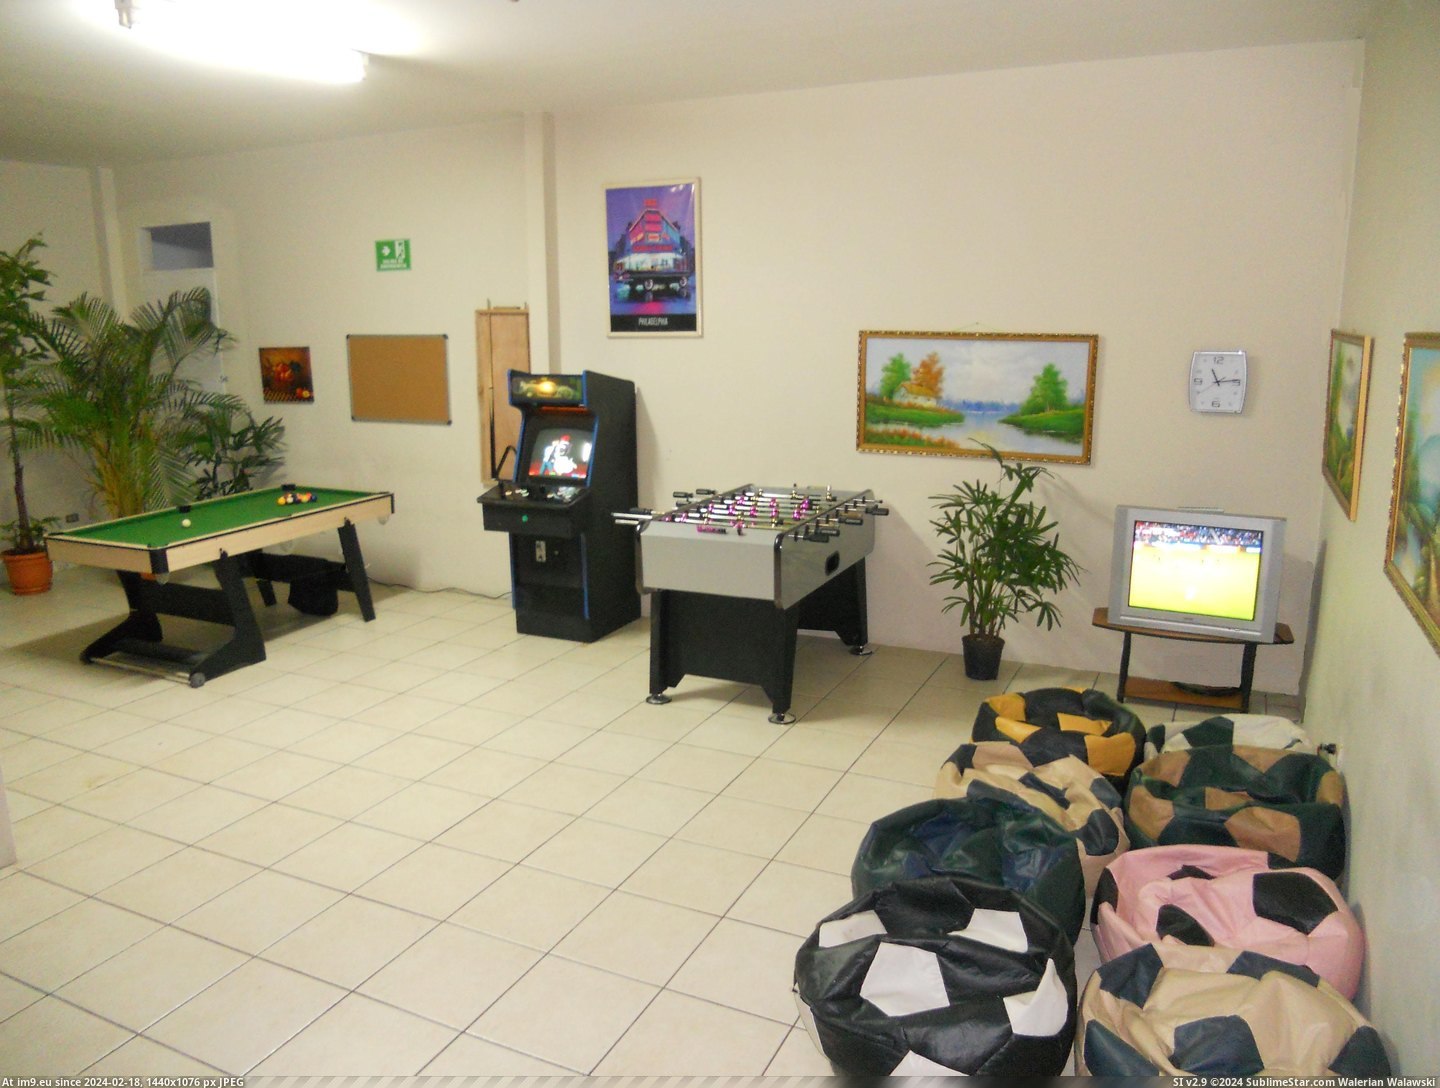 CONTACT CENTRE GAME ROOM DESIGNS 2010 (in BEST BOSS SUPPORTS EMPLOYEE GAME ROOM VIDEO ARCADE)